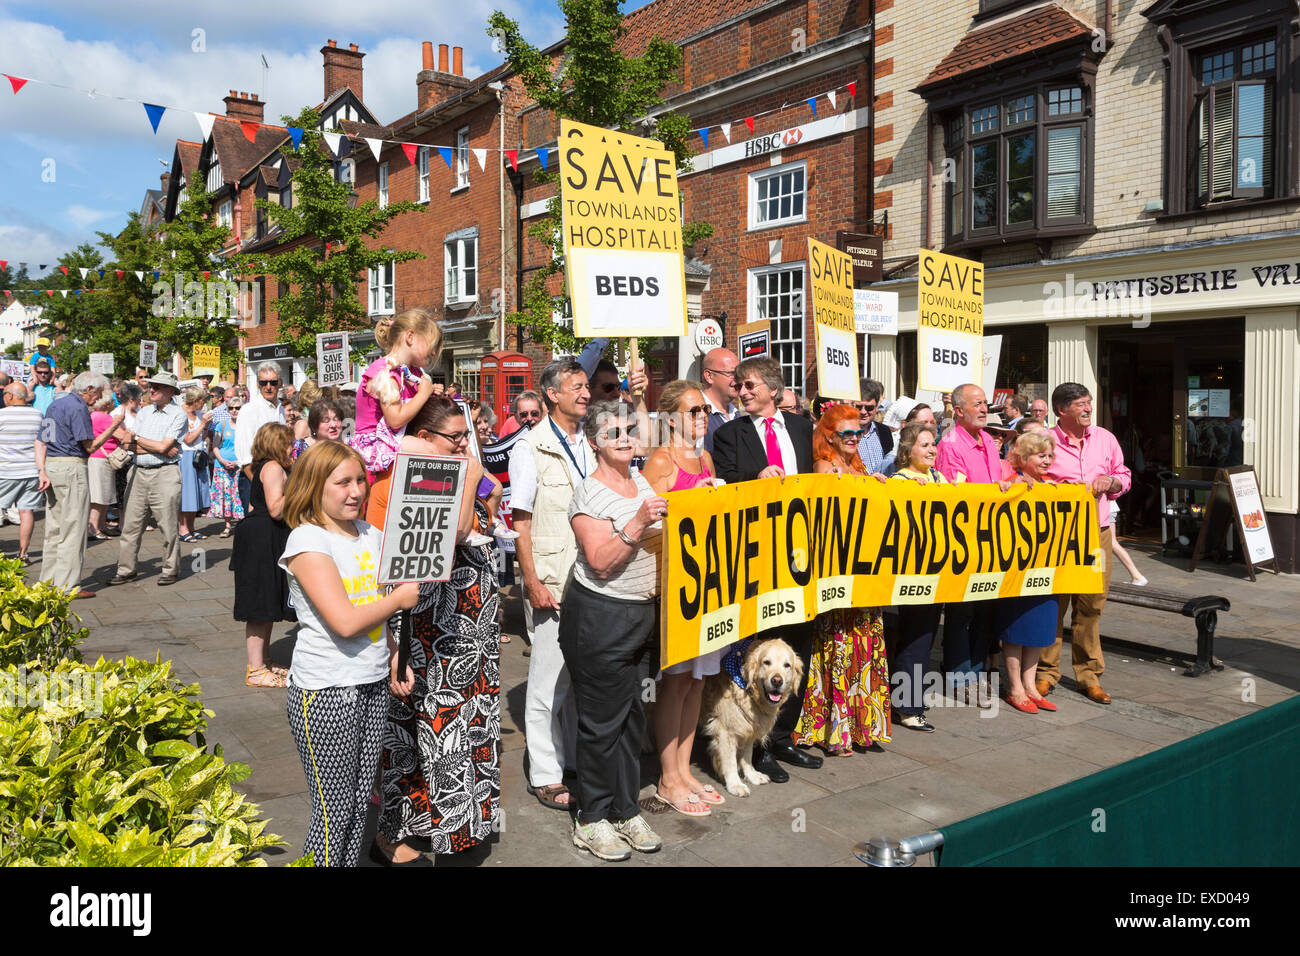 Henley-on-Thames, UK. 11th July, 2015. A large crowd of campaigners including Henley's Mayor, Lorraine Hillier, Cllrs Ian Reissmann and Stefan Gawrysiak and South Oxfordshire District Councillor Paul Harrison, takes part in a peaceful protest march in Henley-on-Thames on Saturday 11 July 2015 against the Oxfordshire Clinical Commissioning Group's plans for its new health campus, Townlands Hospital.  The new hospital originally planned to have 18 beds, now changed to five beds in a care home to be built next to the hospital Credit:  Graham Prentice/Alamy Live News Stock Photo